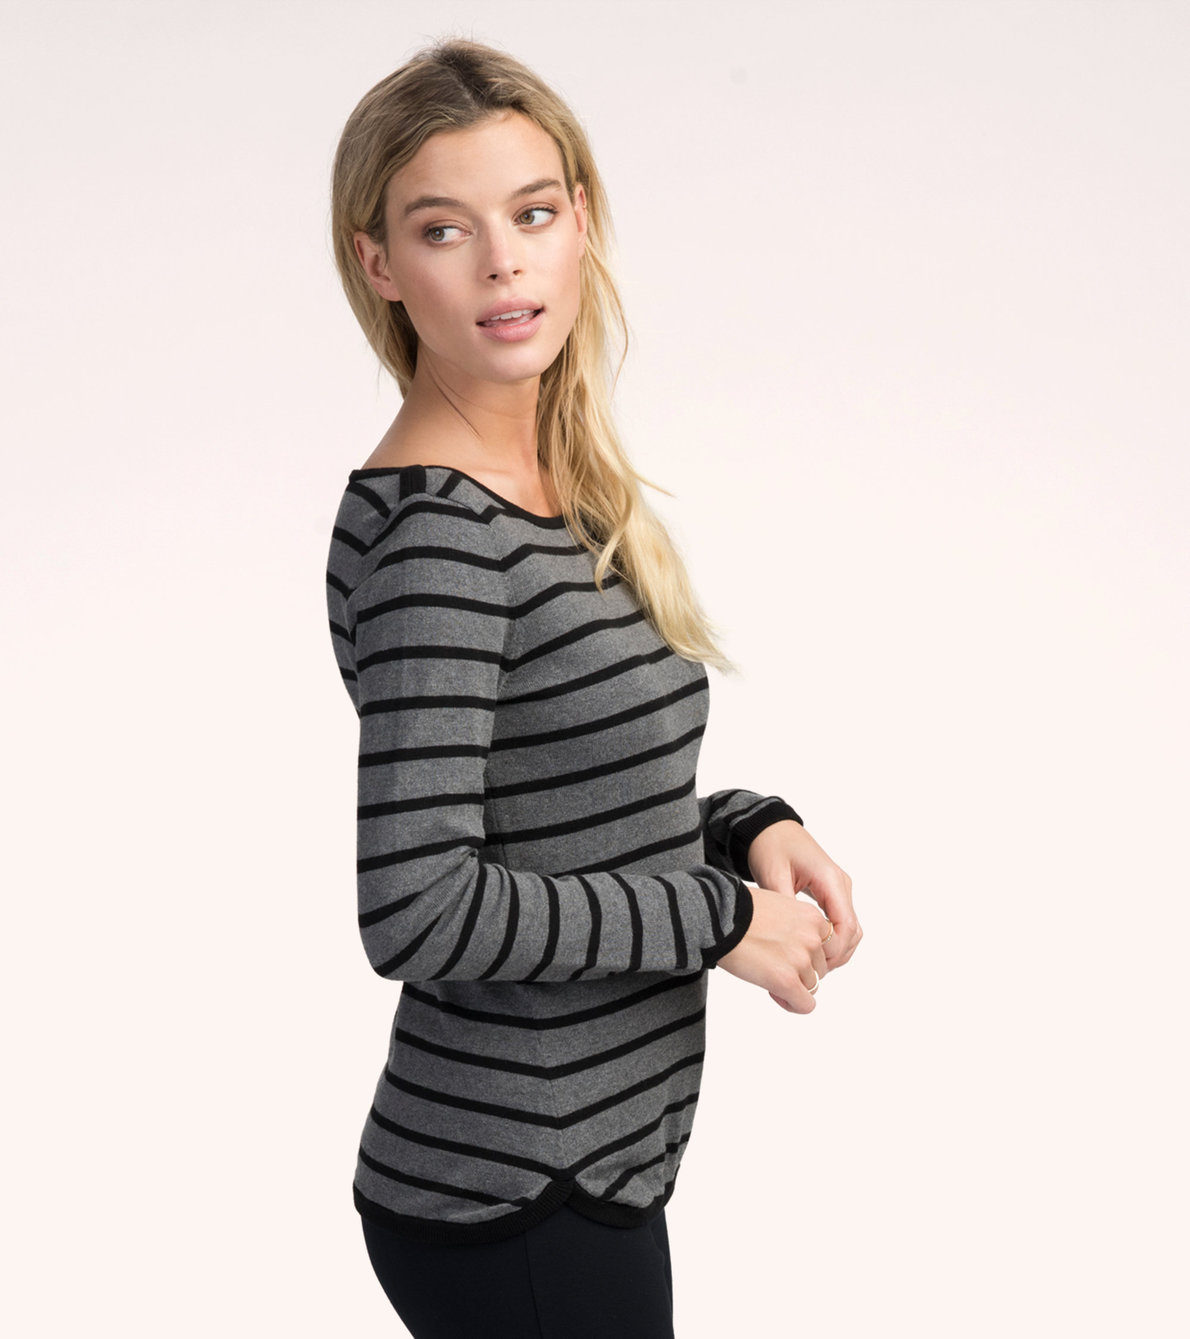 View larger image of Charcoal and Black Stripes Breton Top